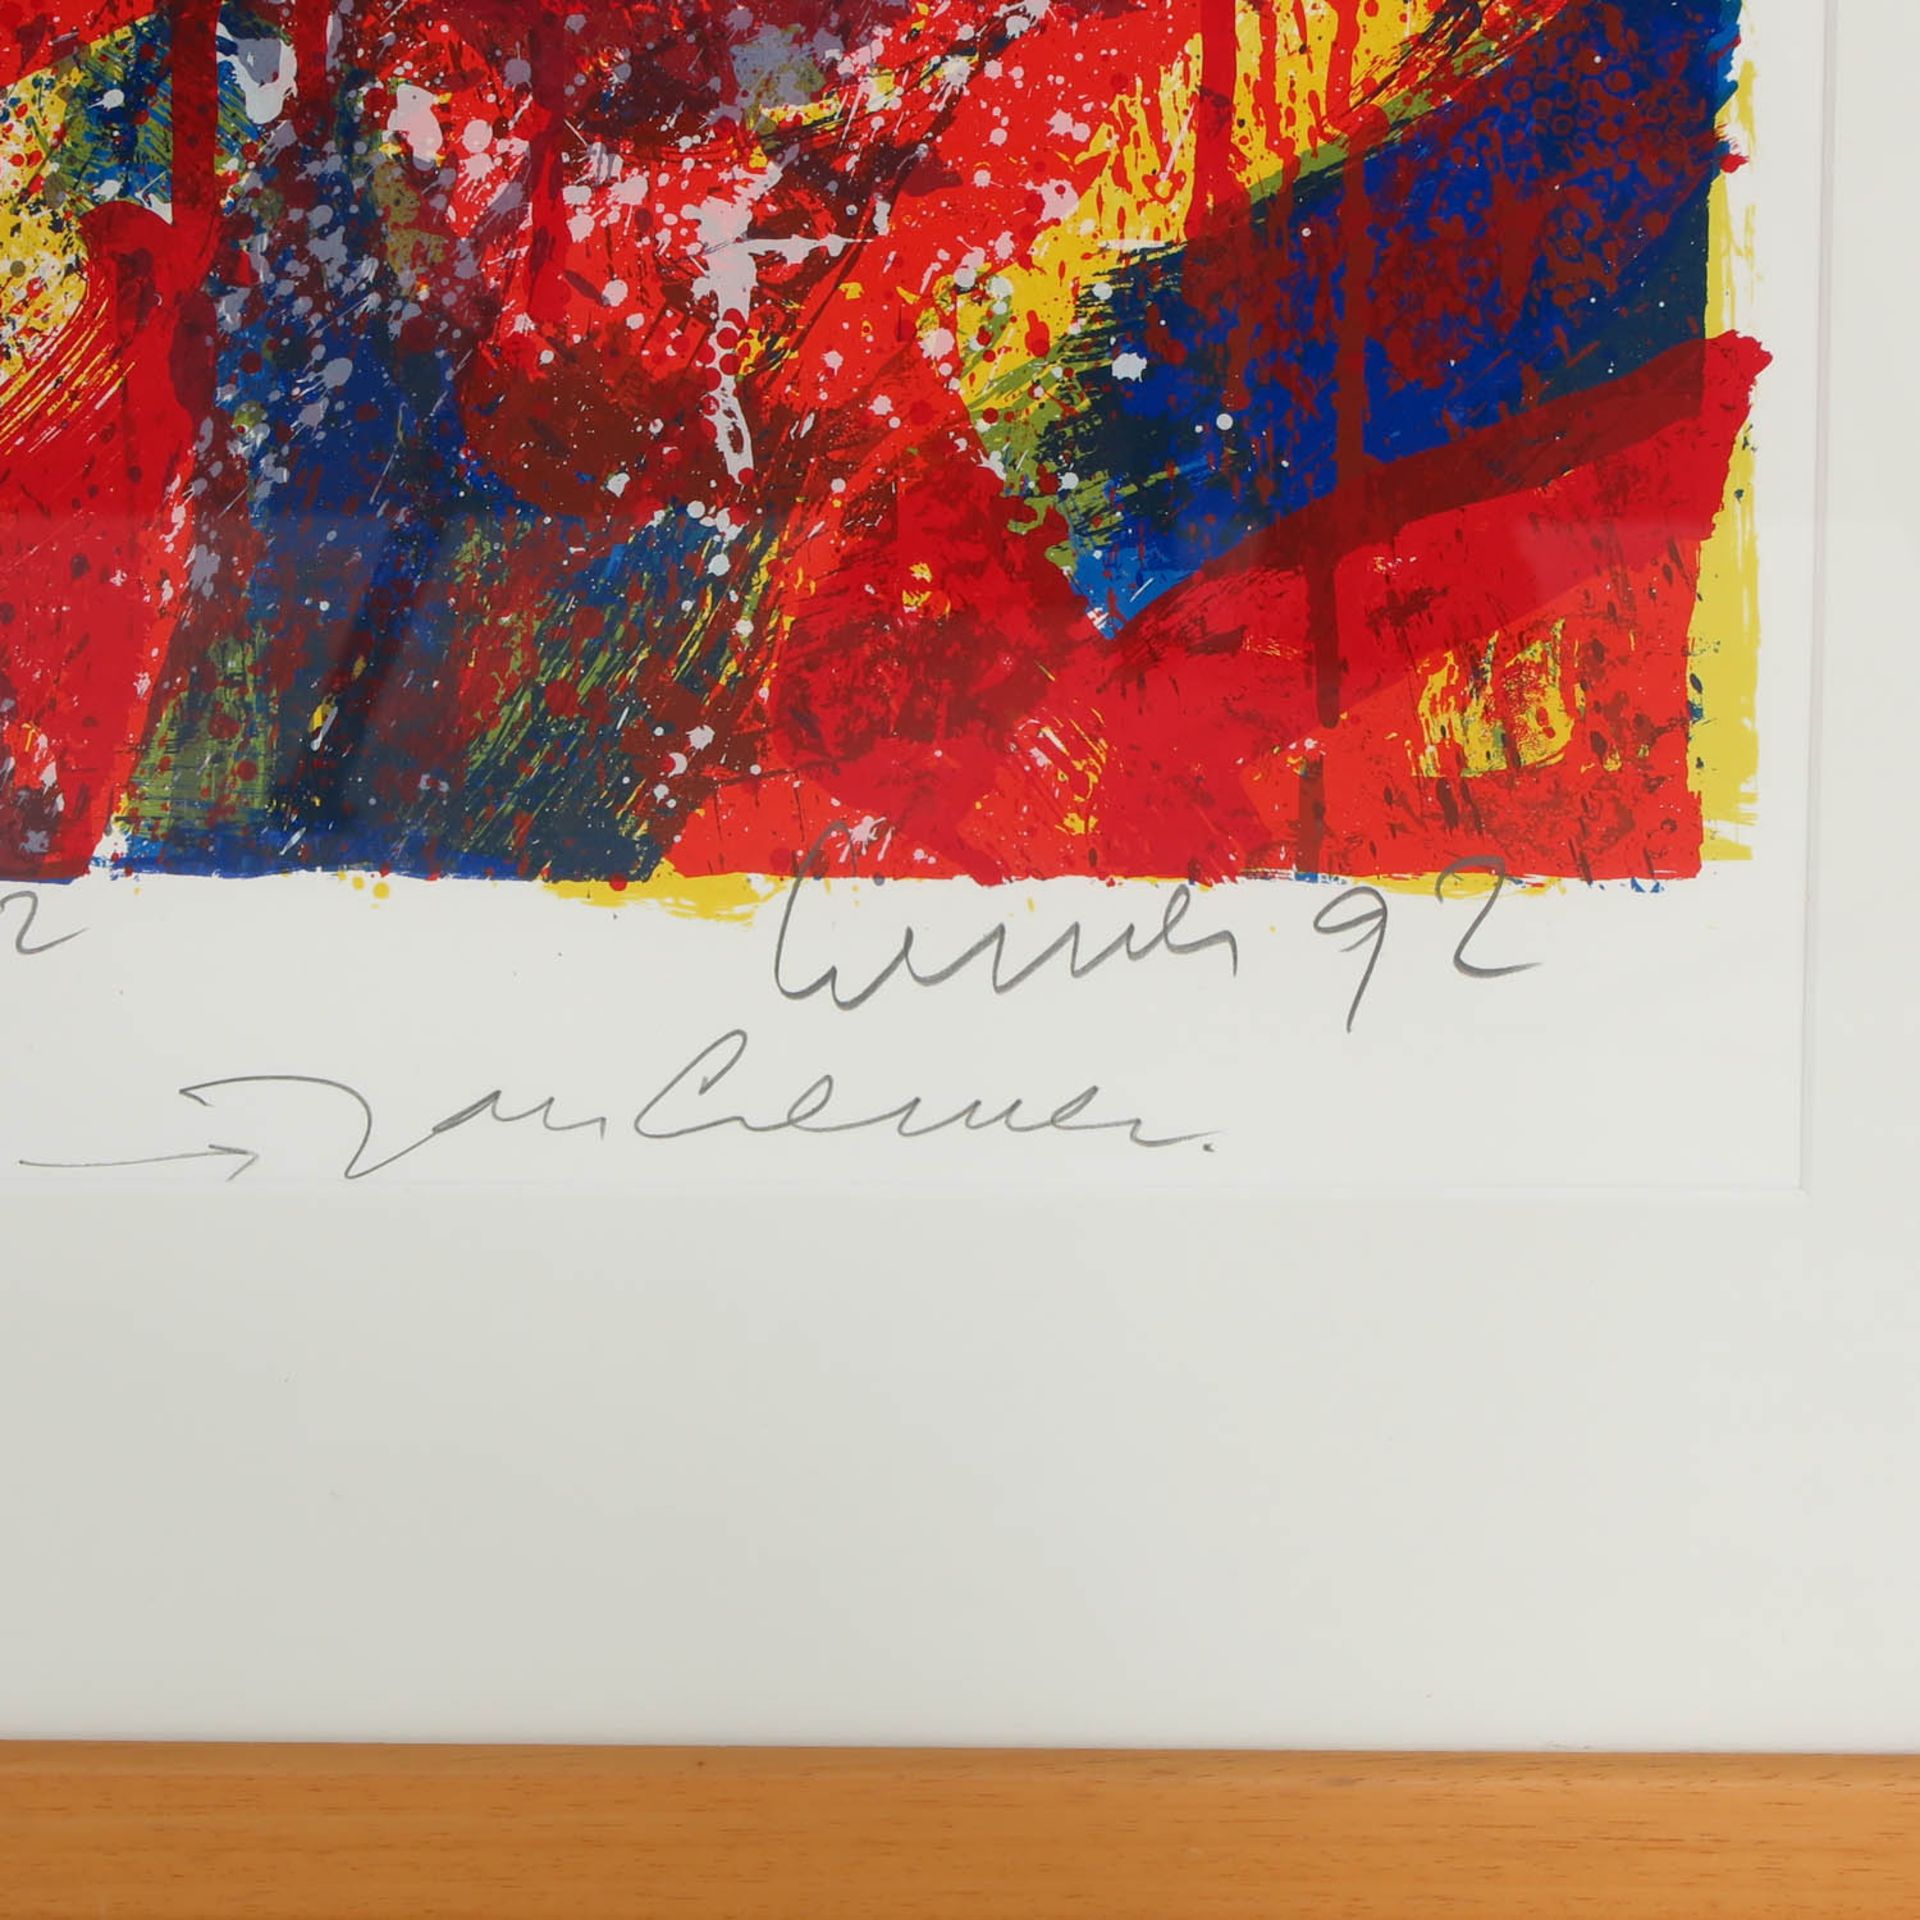 A Signed and Numbered Lithograph by Jan Cremer - Image 3 of 7